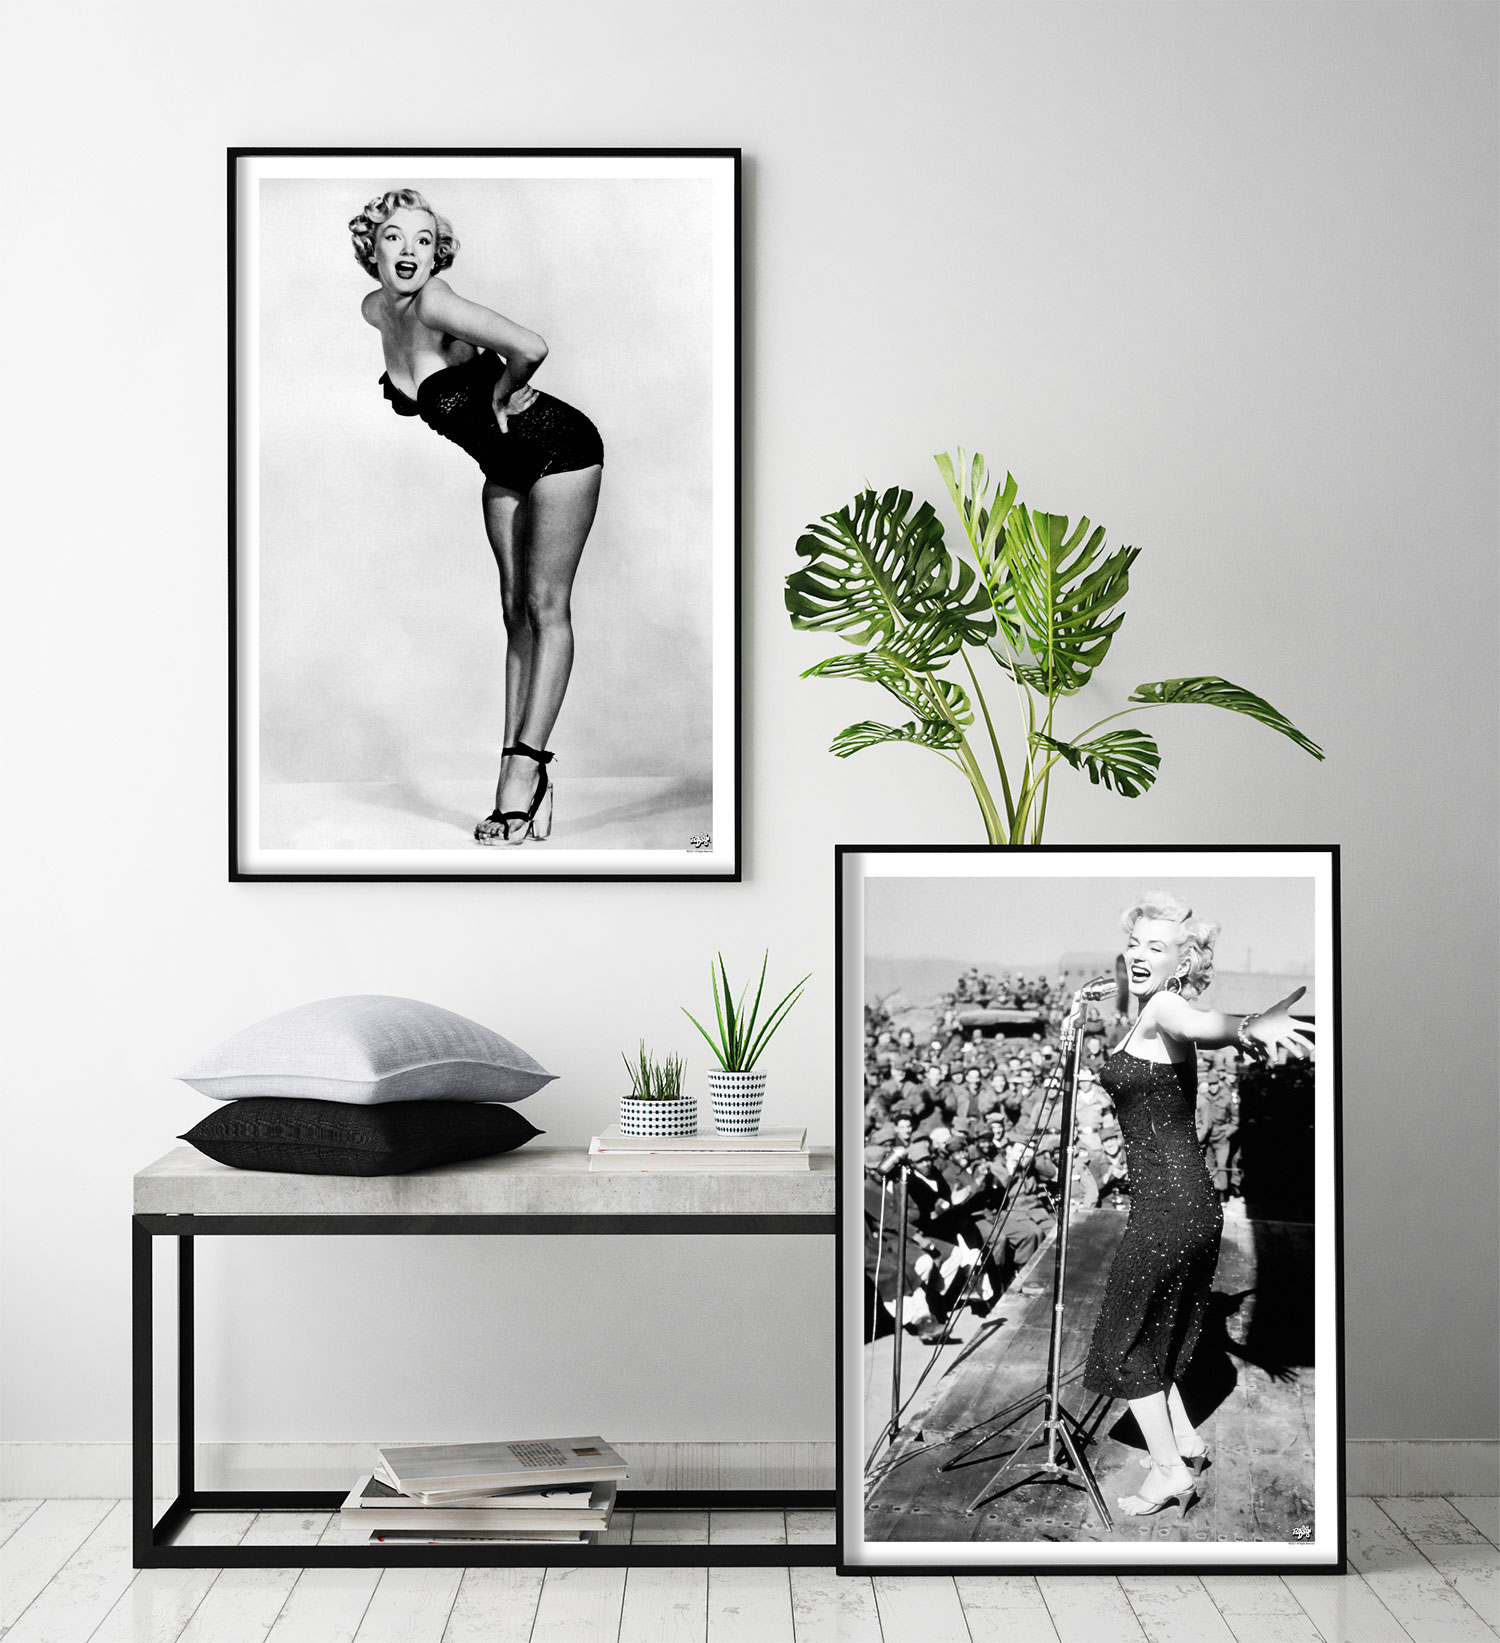 Marilyn Monroe Pose Poster, Quality Print, American icon, actress, Vintage  Art Photography, Home Décor, Wall Art Framed - AliExpress